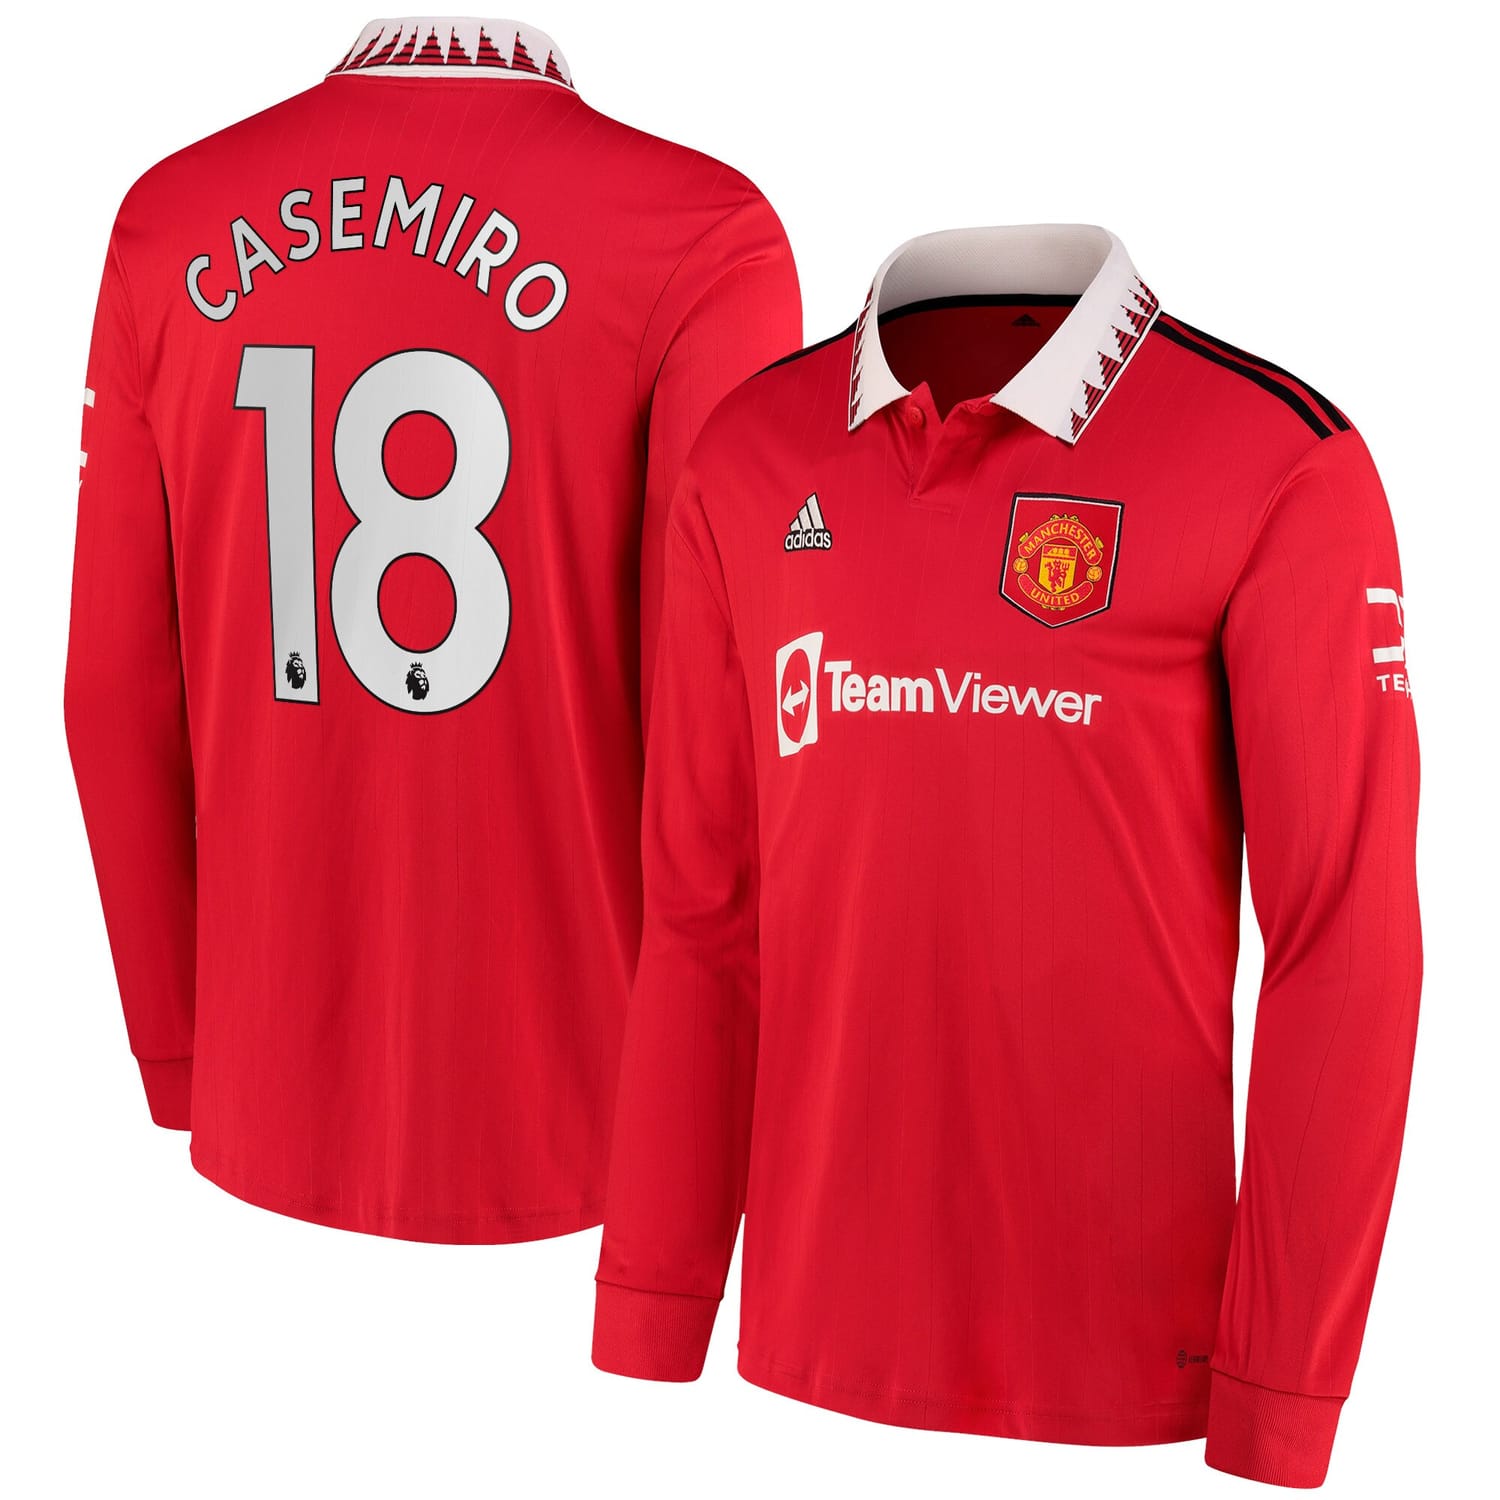 Premier League Manchester United Home Jersey Shirt Long Sleeve 2022-23 player Casemiro 18 printing for Men